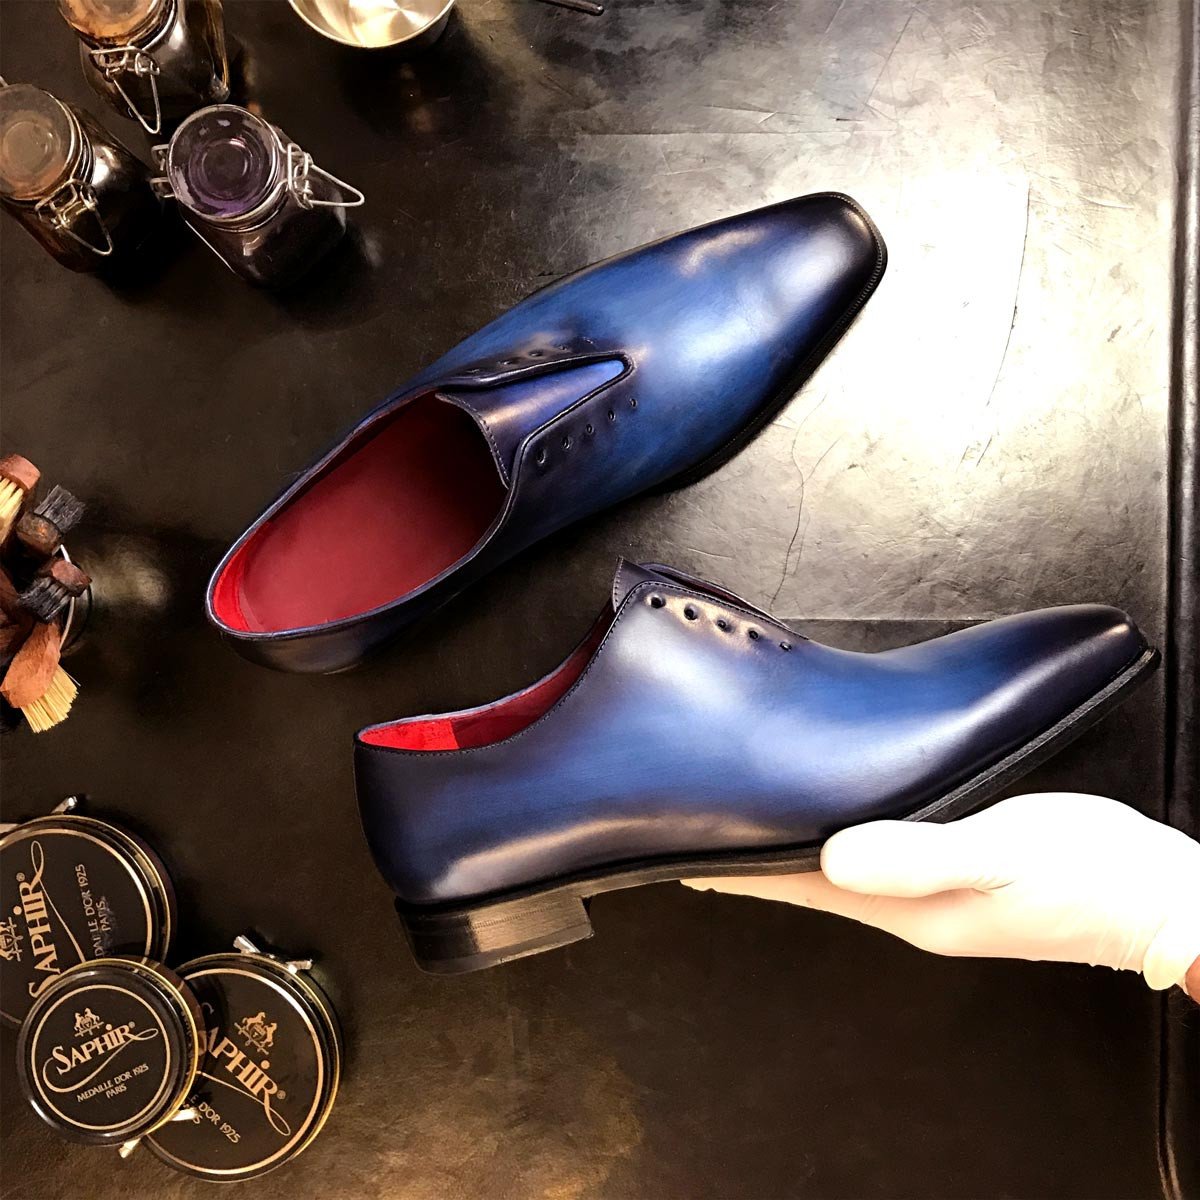 YING - Unique Handcrafted Whole cut Oxford Dress Shoe w/ blue and black handpainted Patina